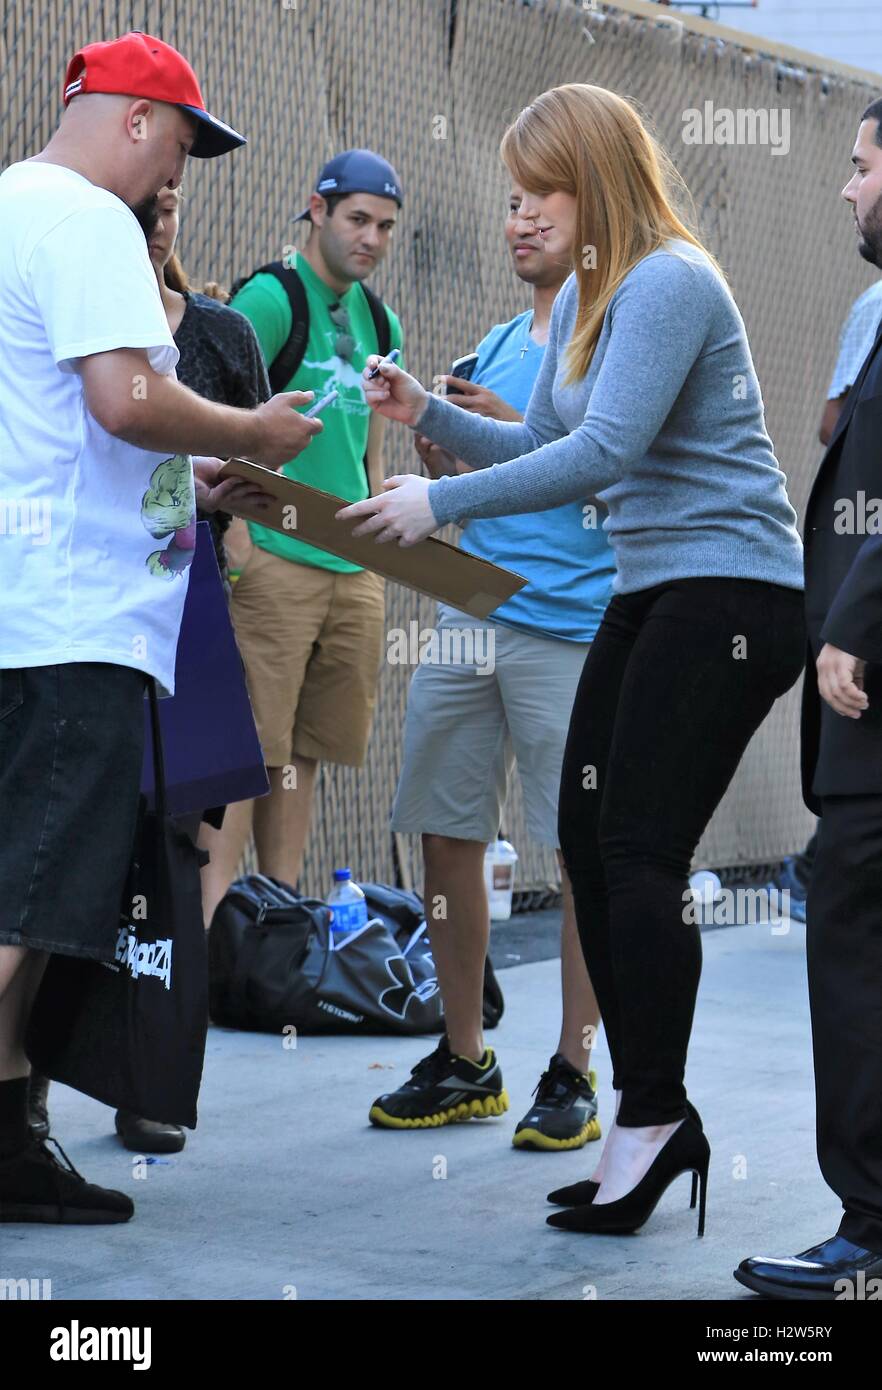 Celebrities outside the 'Jimmy Kimmel Live!' studios  Featuring: Bryce Dallas Howard Where: Los Angeles, California, United States When: 26 Jul 2016 Stock Photo